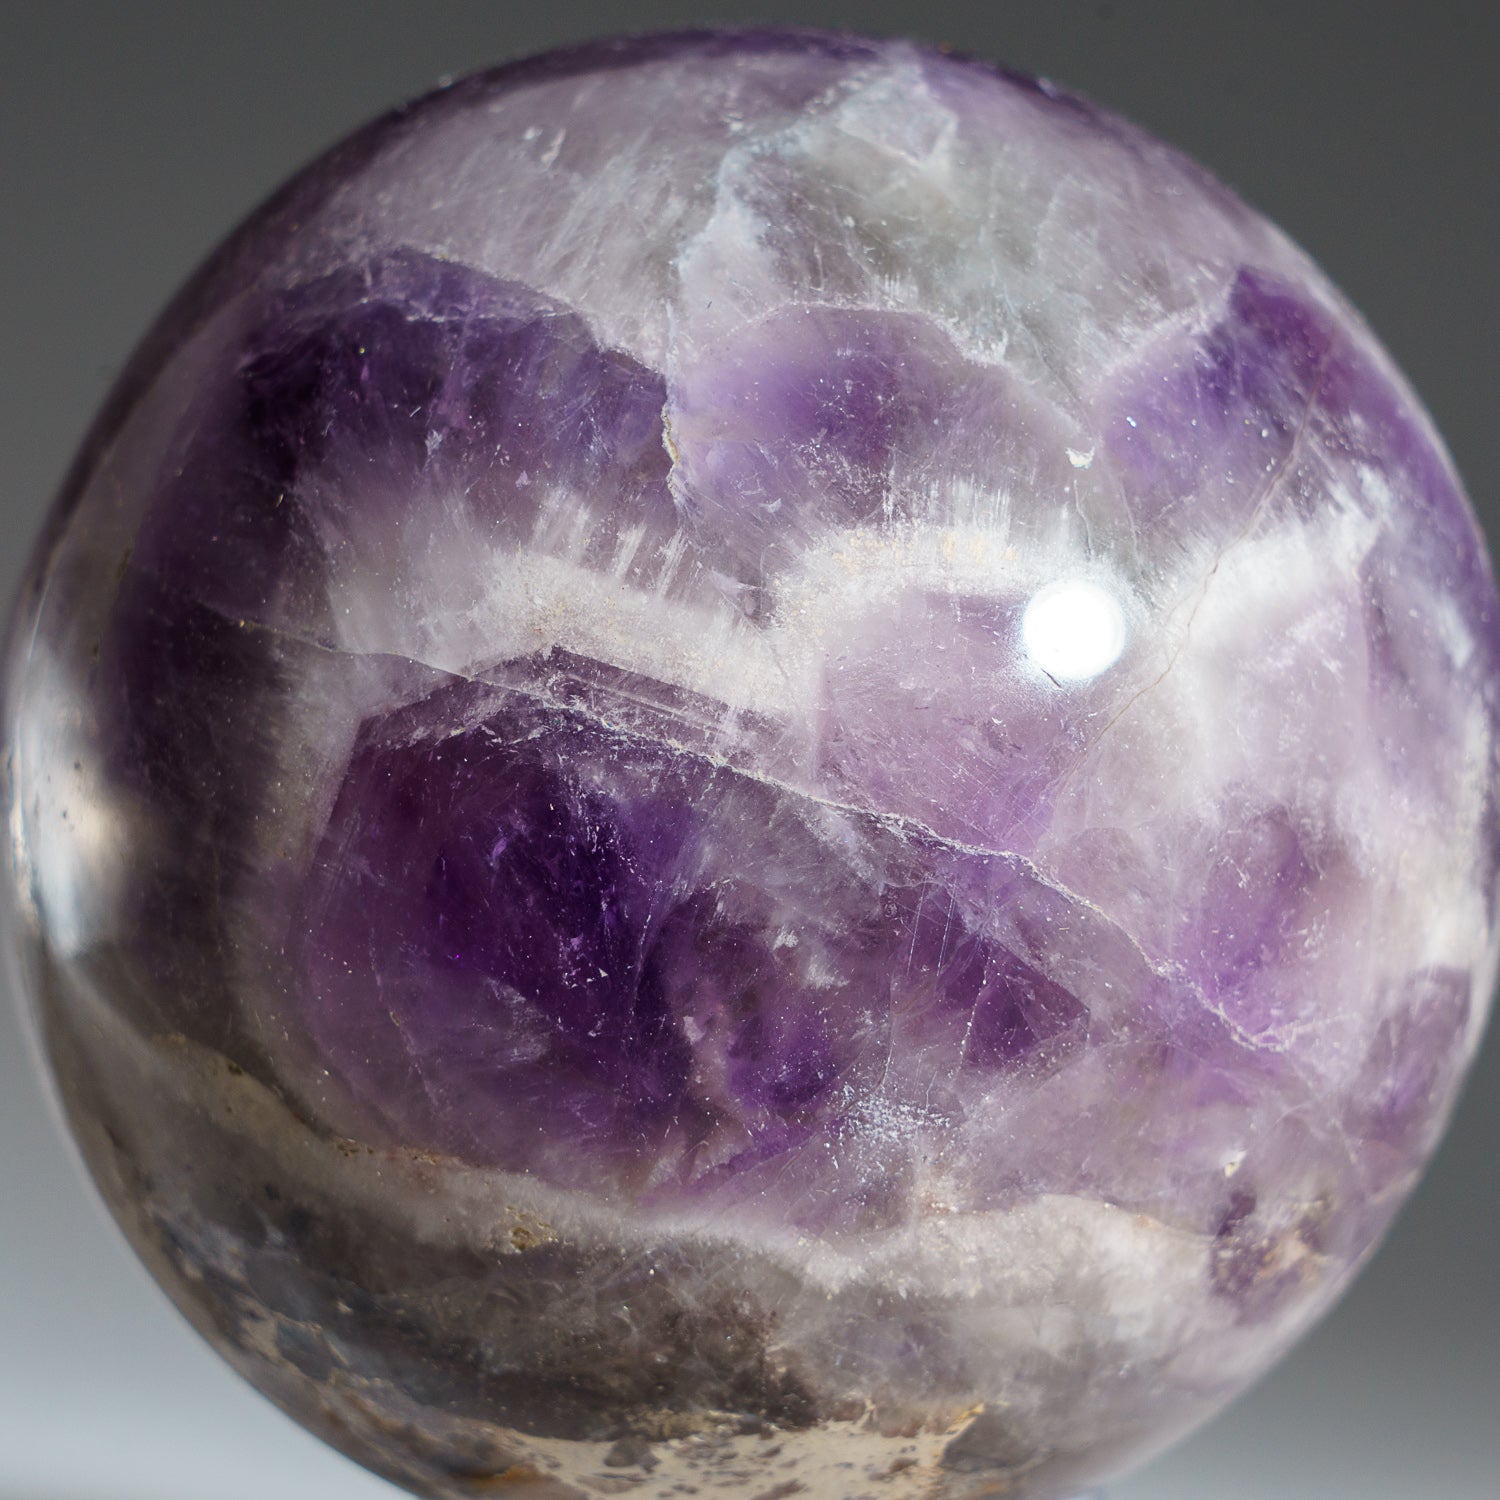 Polished Chevron Amethyst Sphere from Brazil (3", 483.2 gramss)